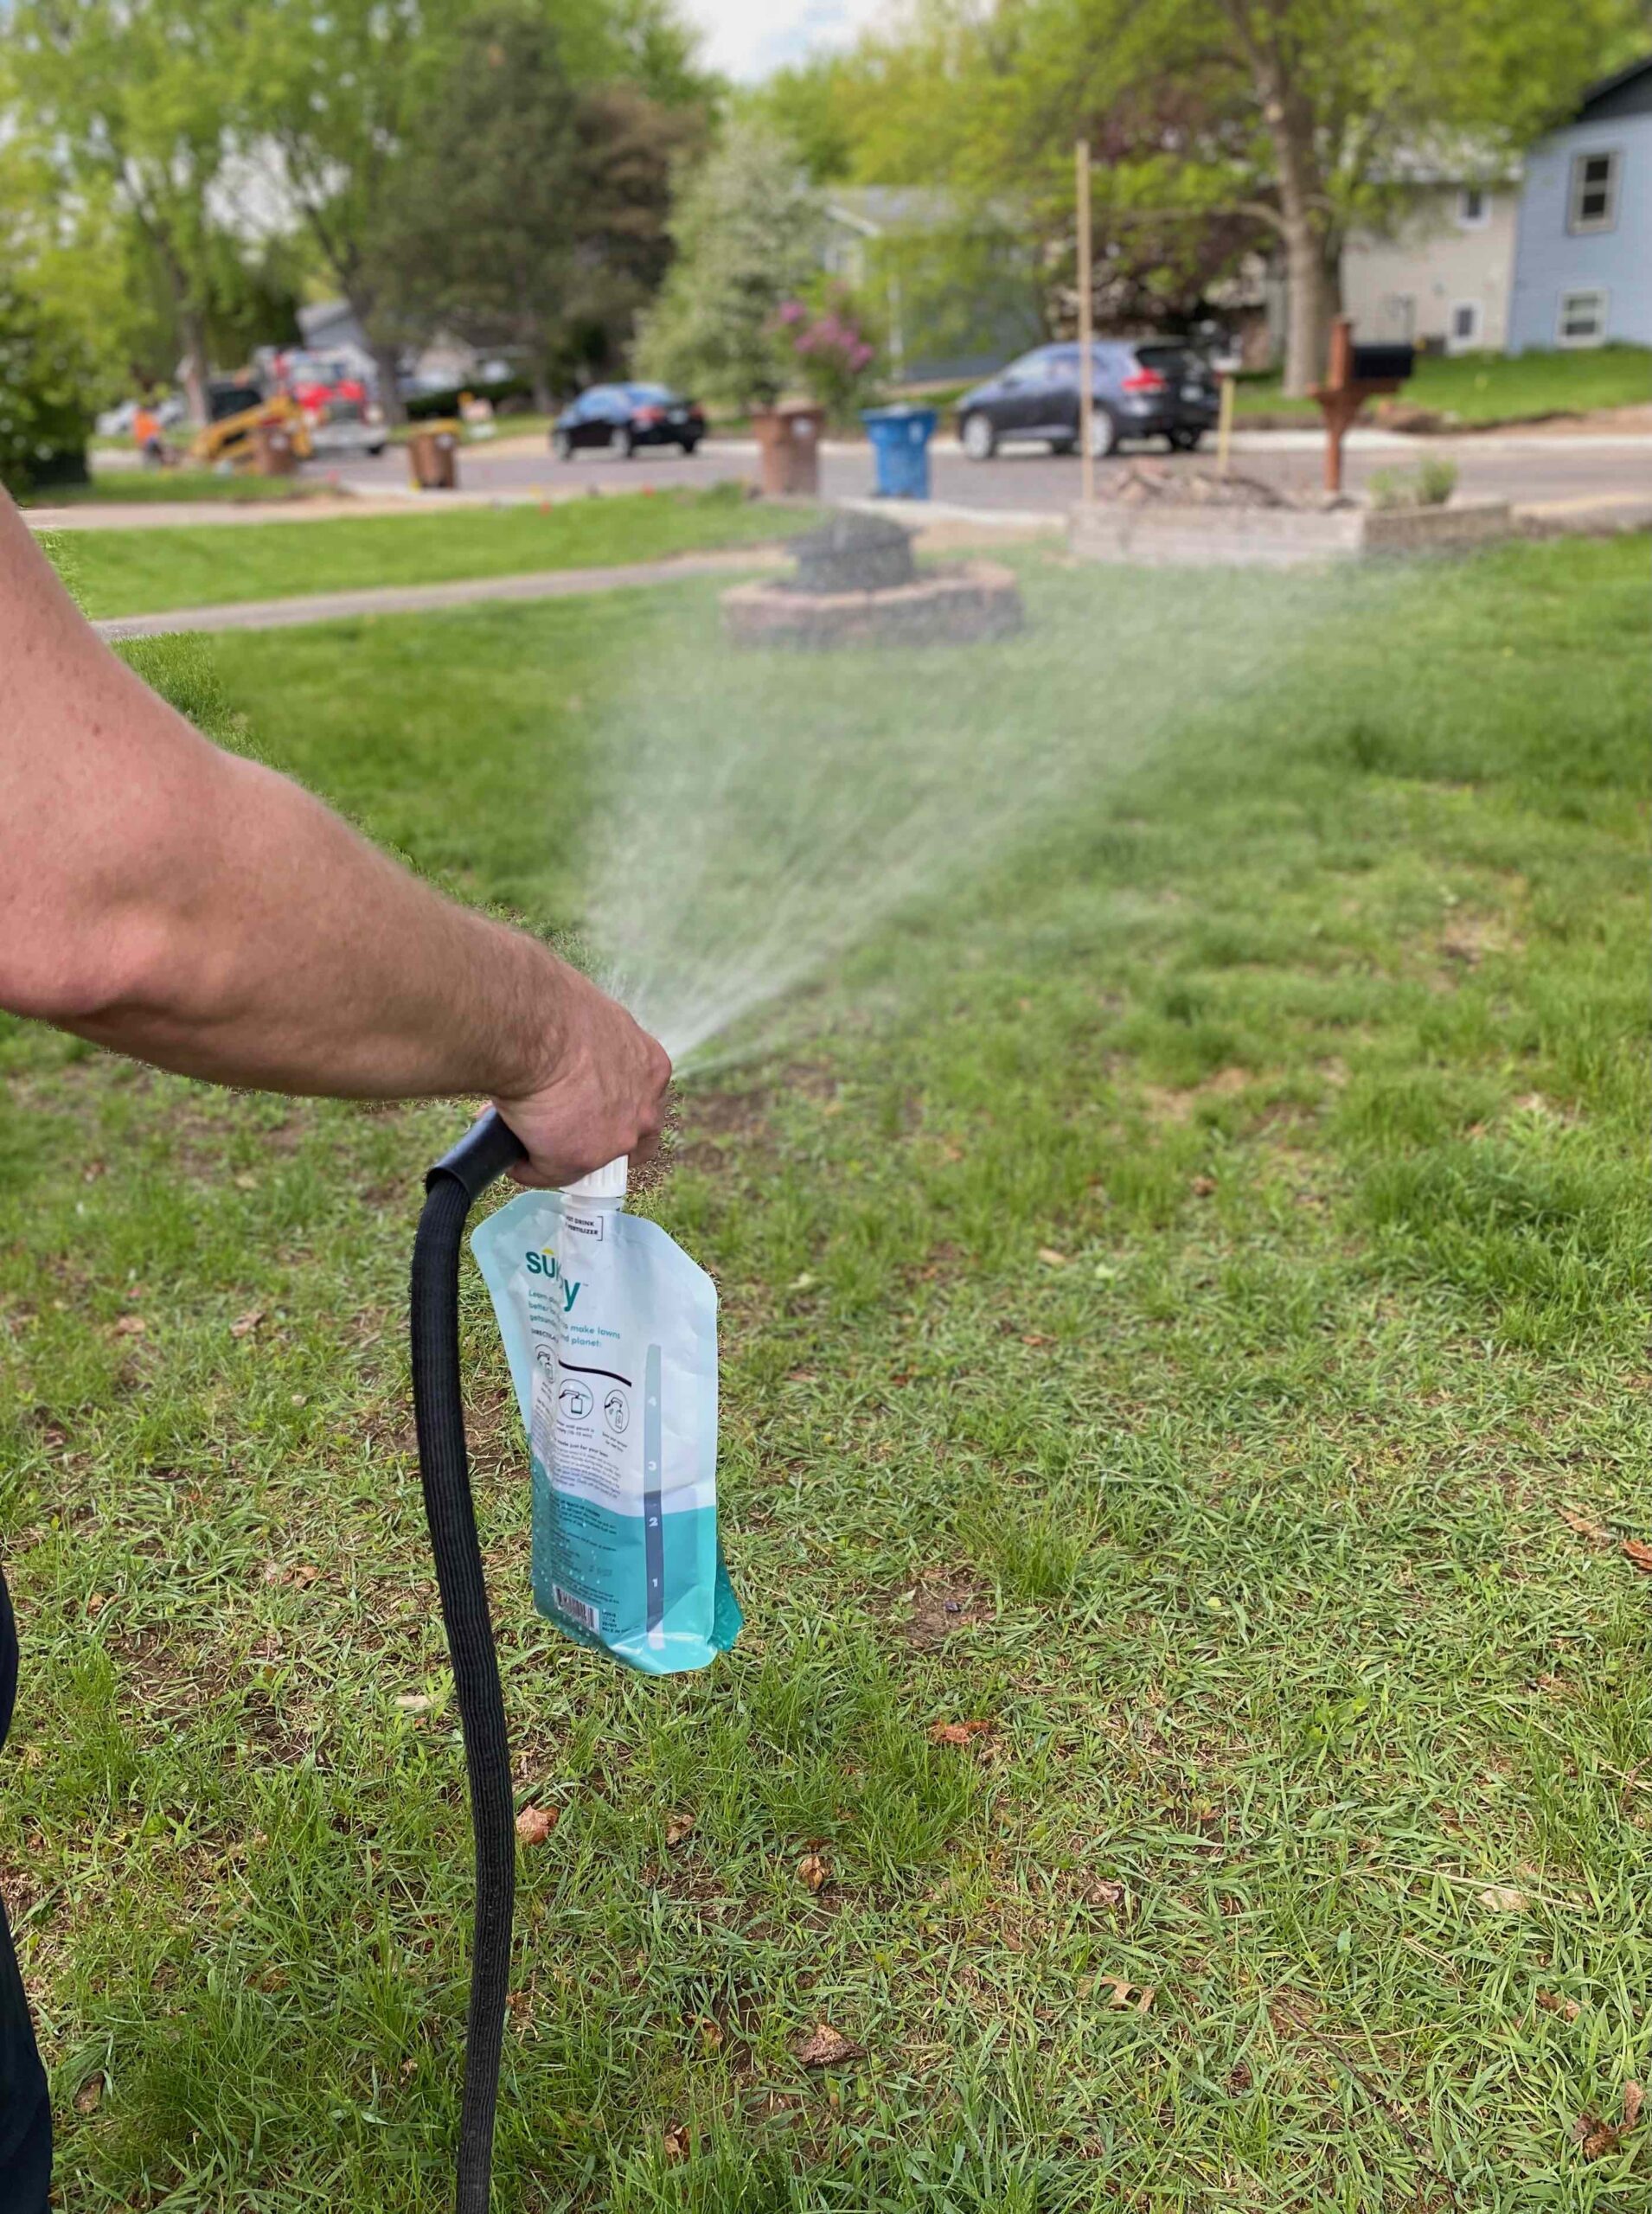 A close up of a person spraying a Sunday lawn care product on a lawn. 